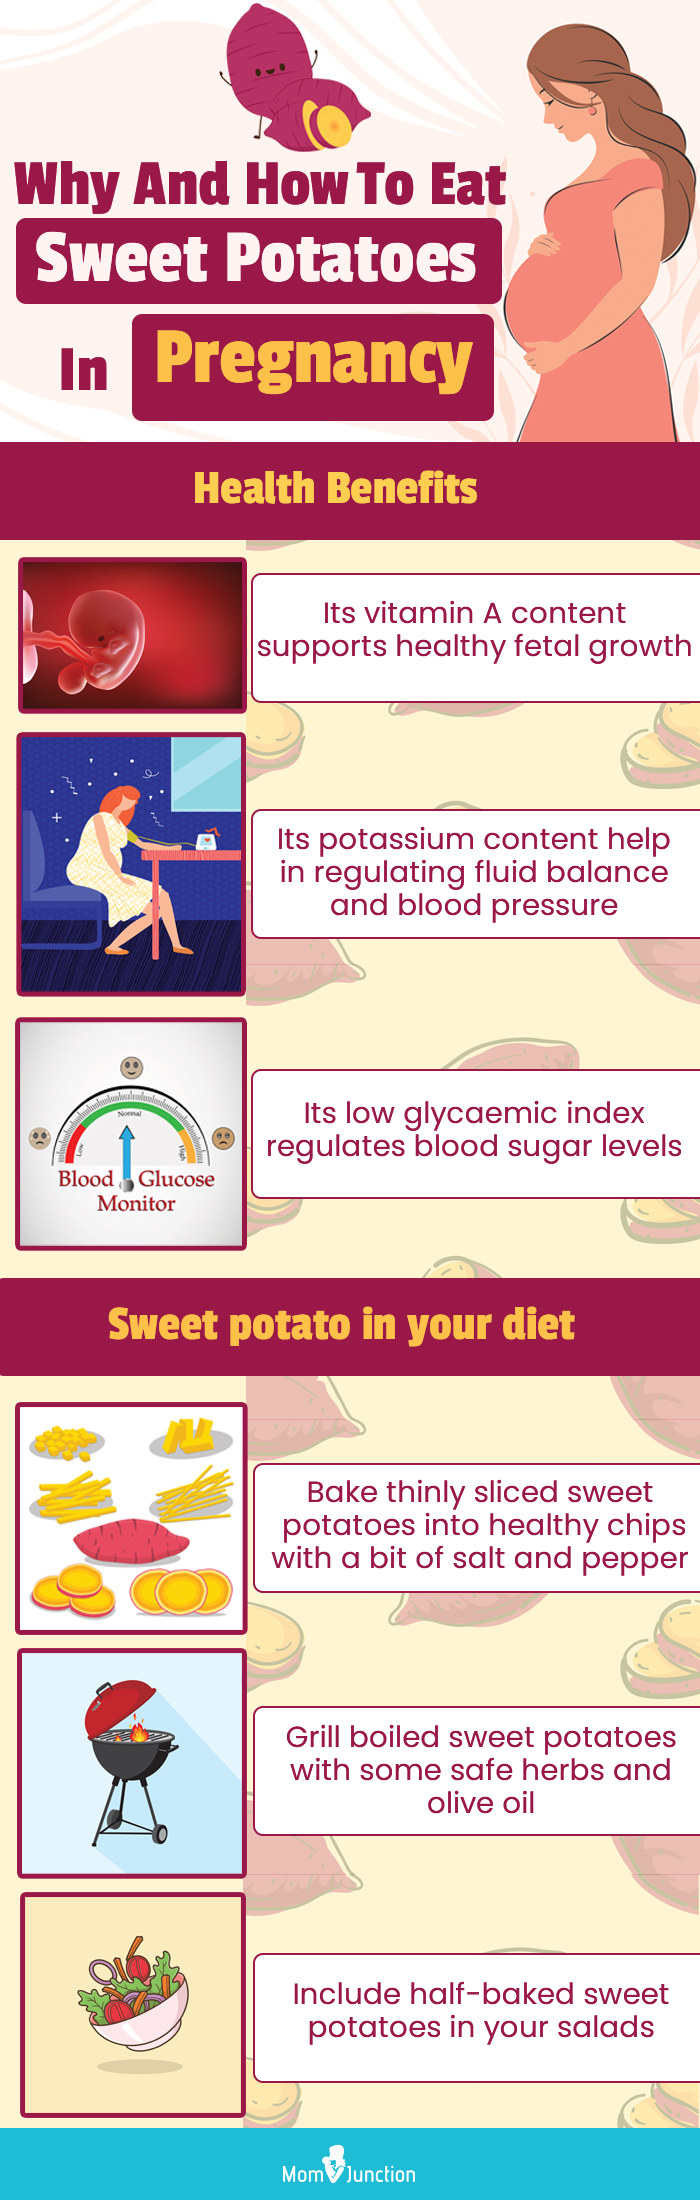 why and how to eat sweet potatoes in pregnancy [infographic]